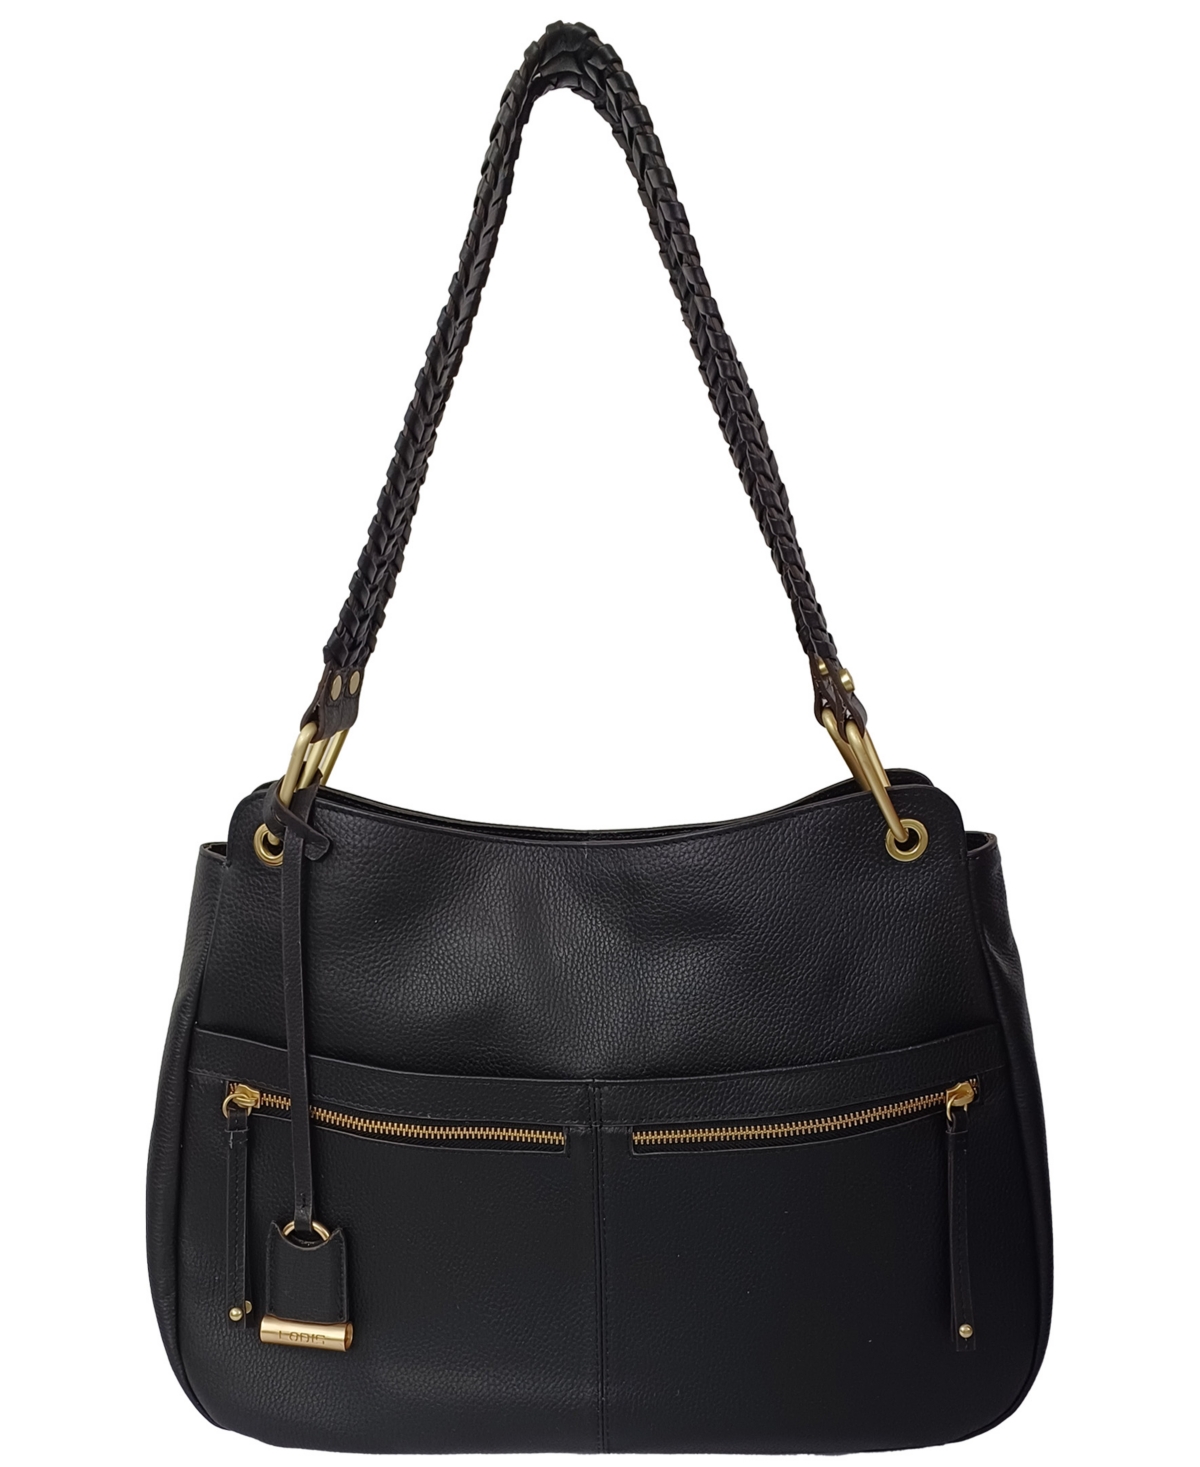 St Barts Leather Tote - Black